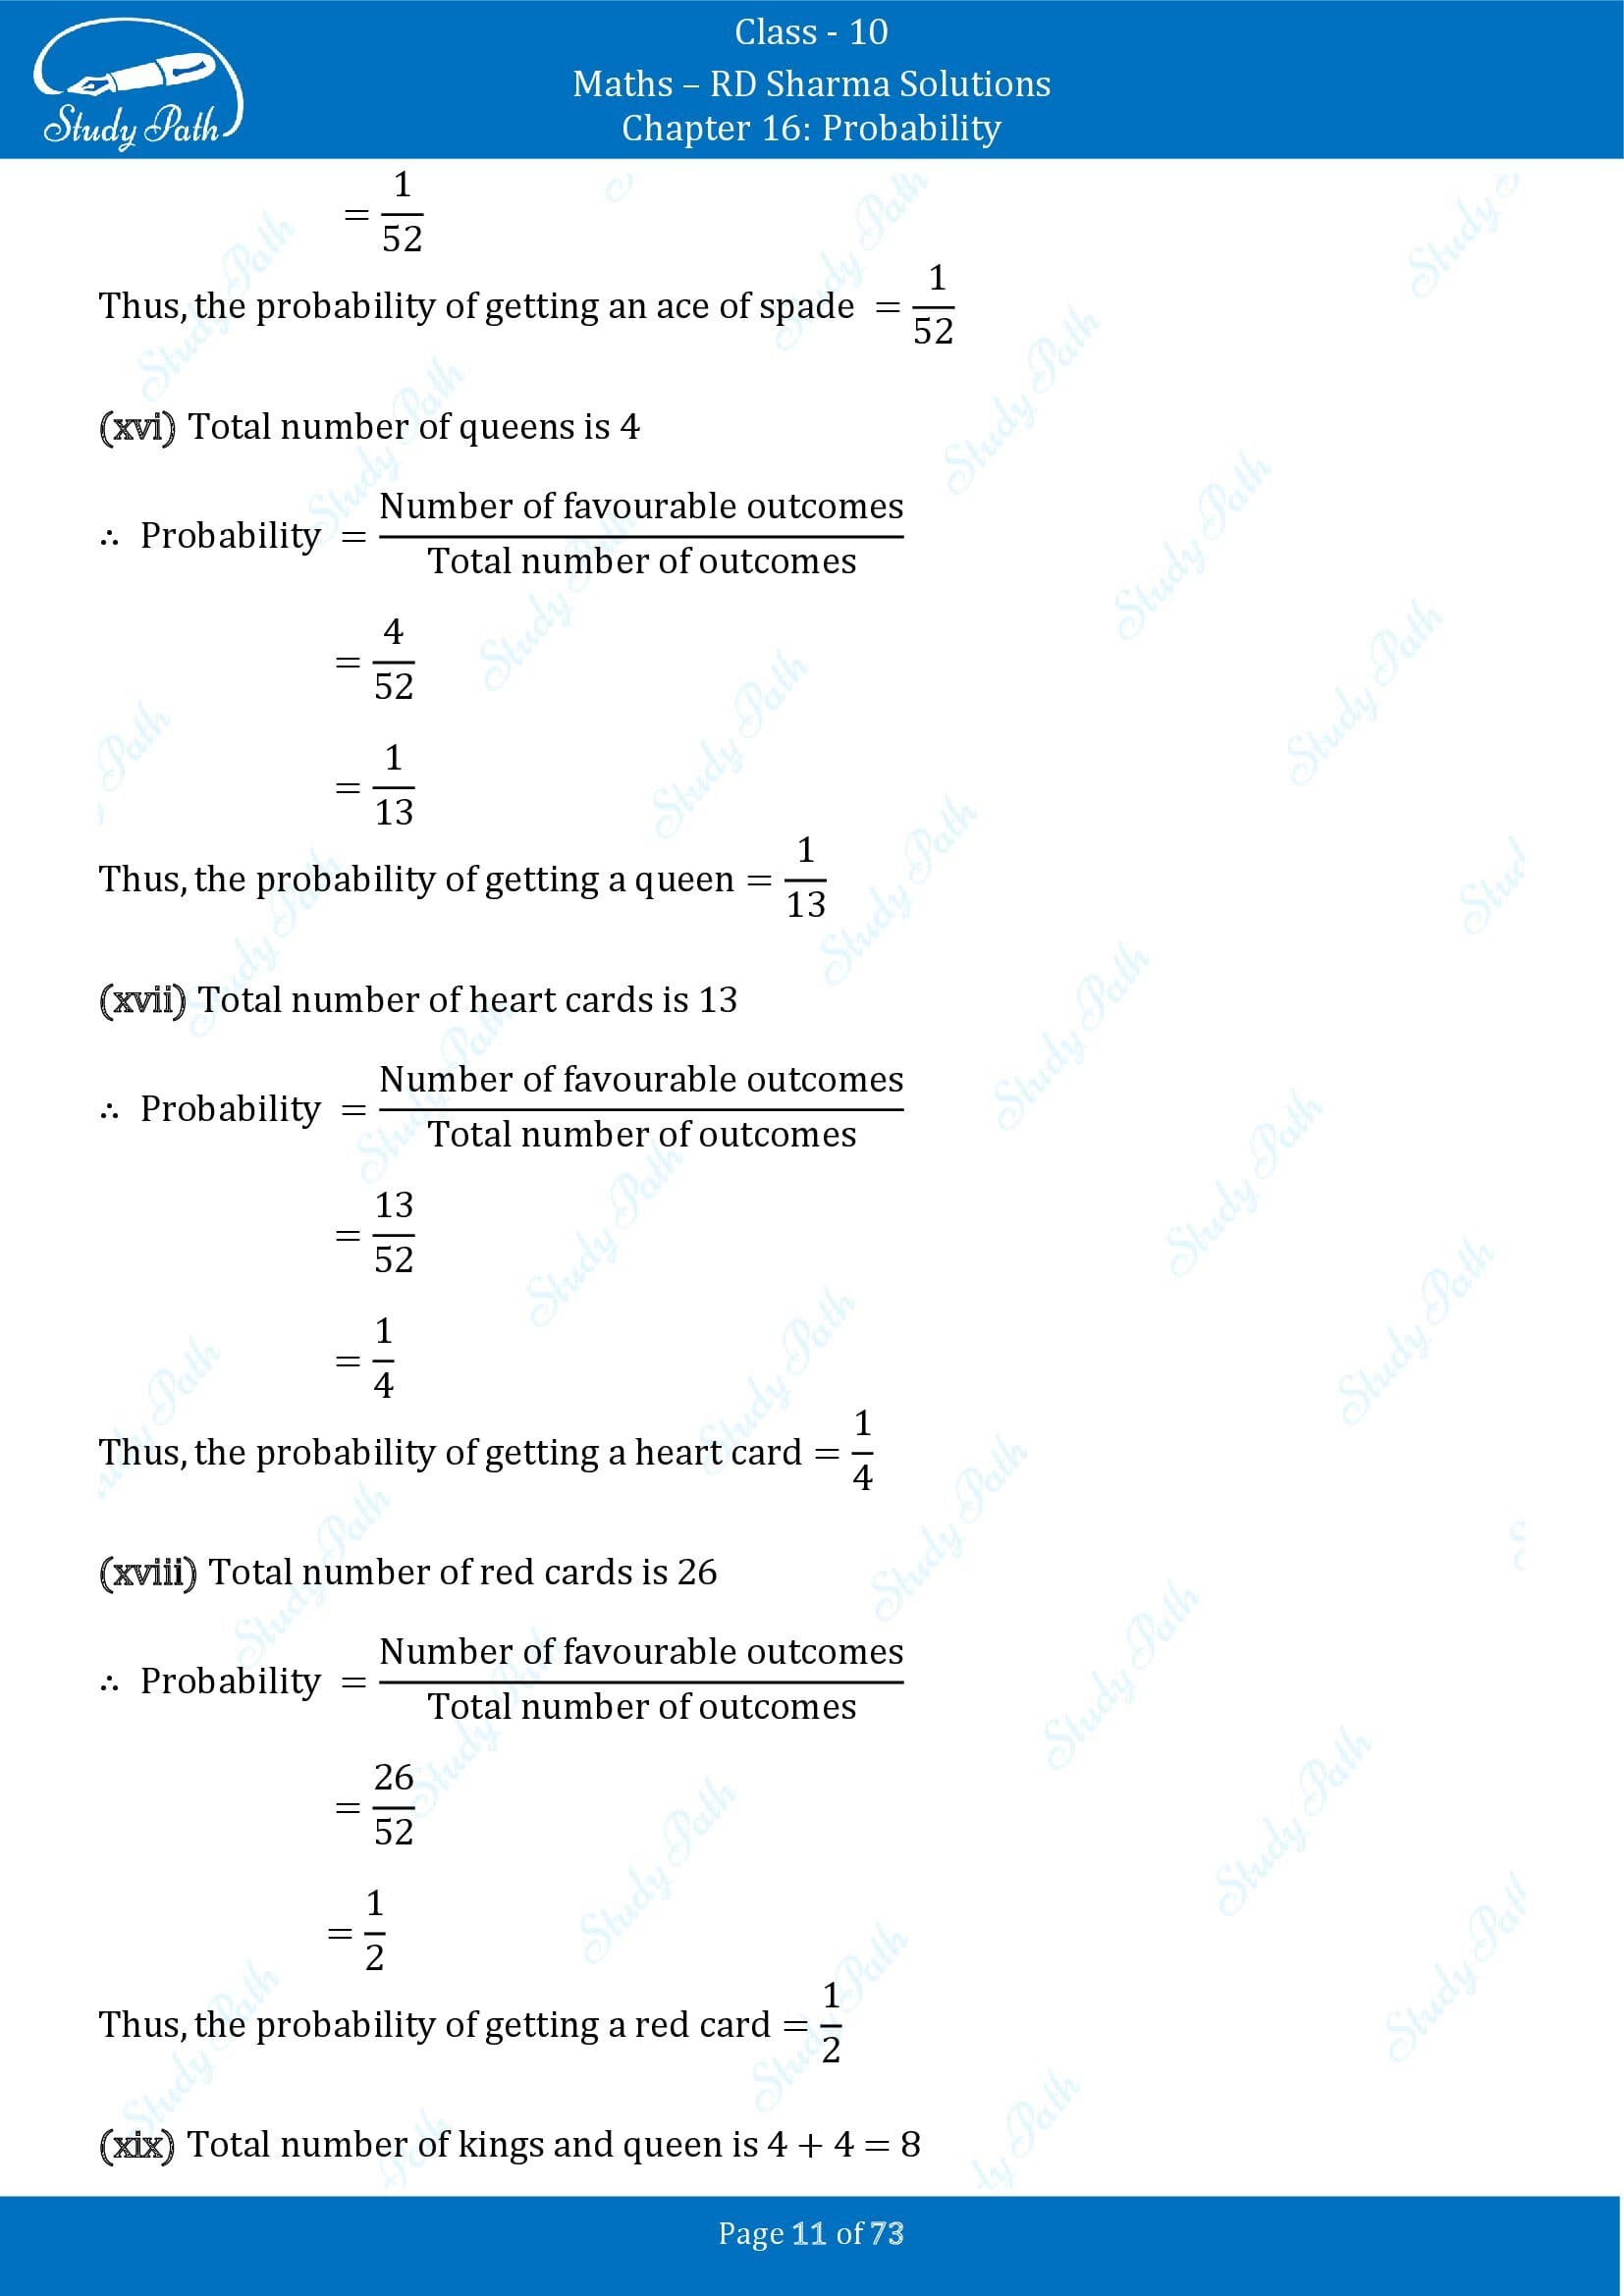 RD Sharma Solutions Class 10 Chapter 16 Probability Exercise 16.1 00011